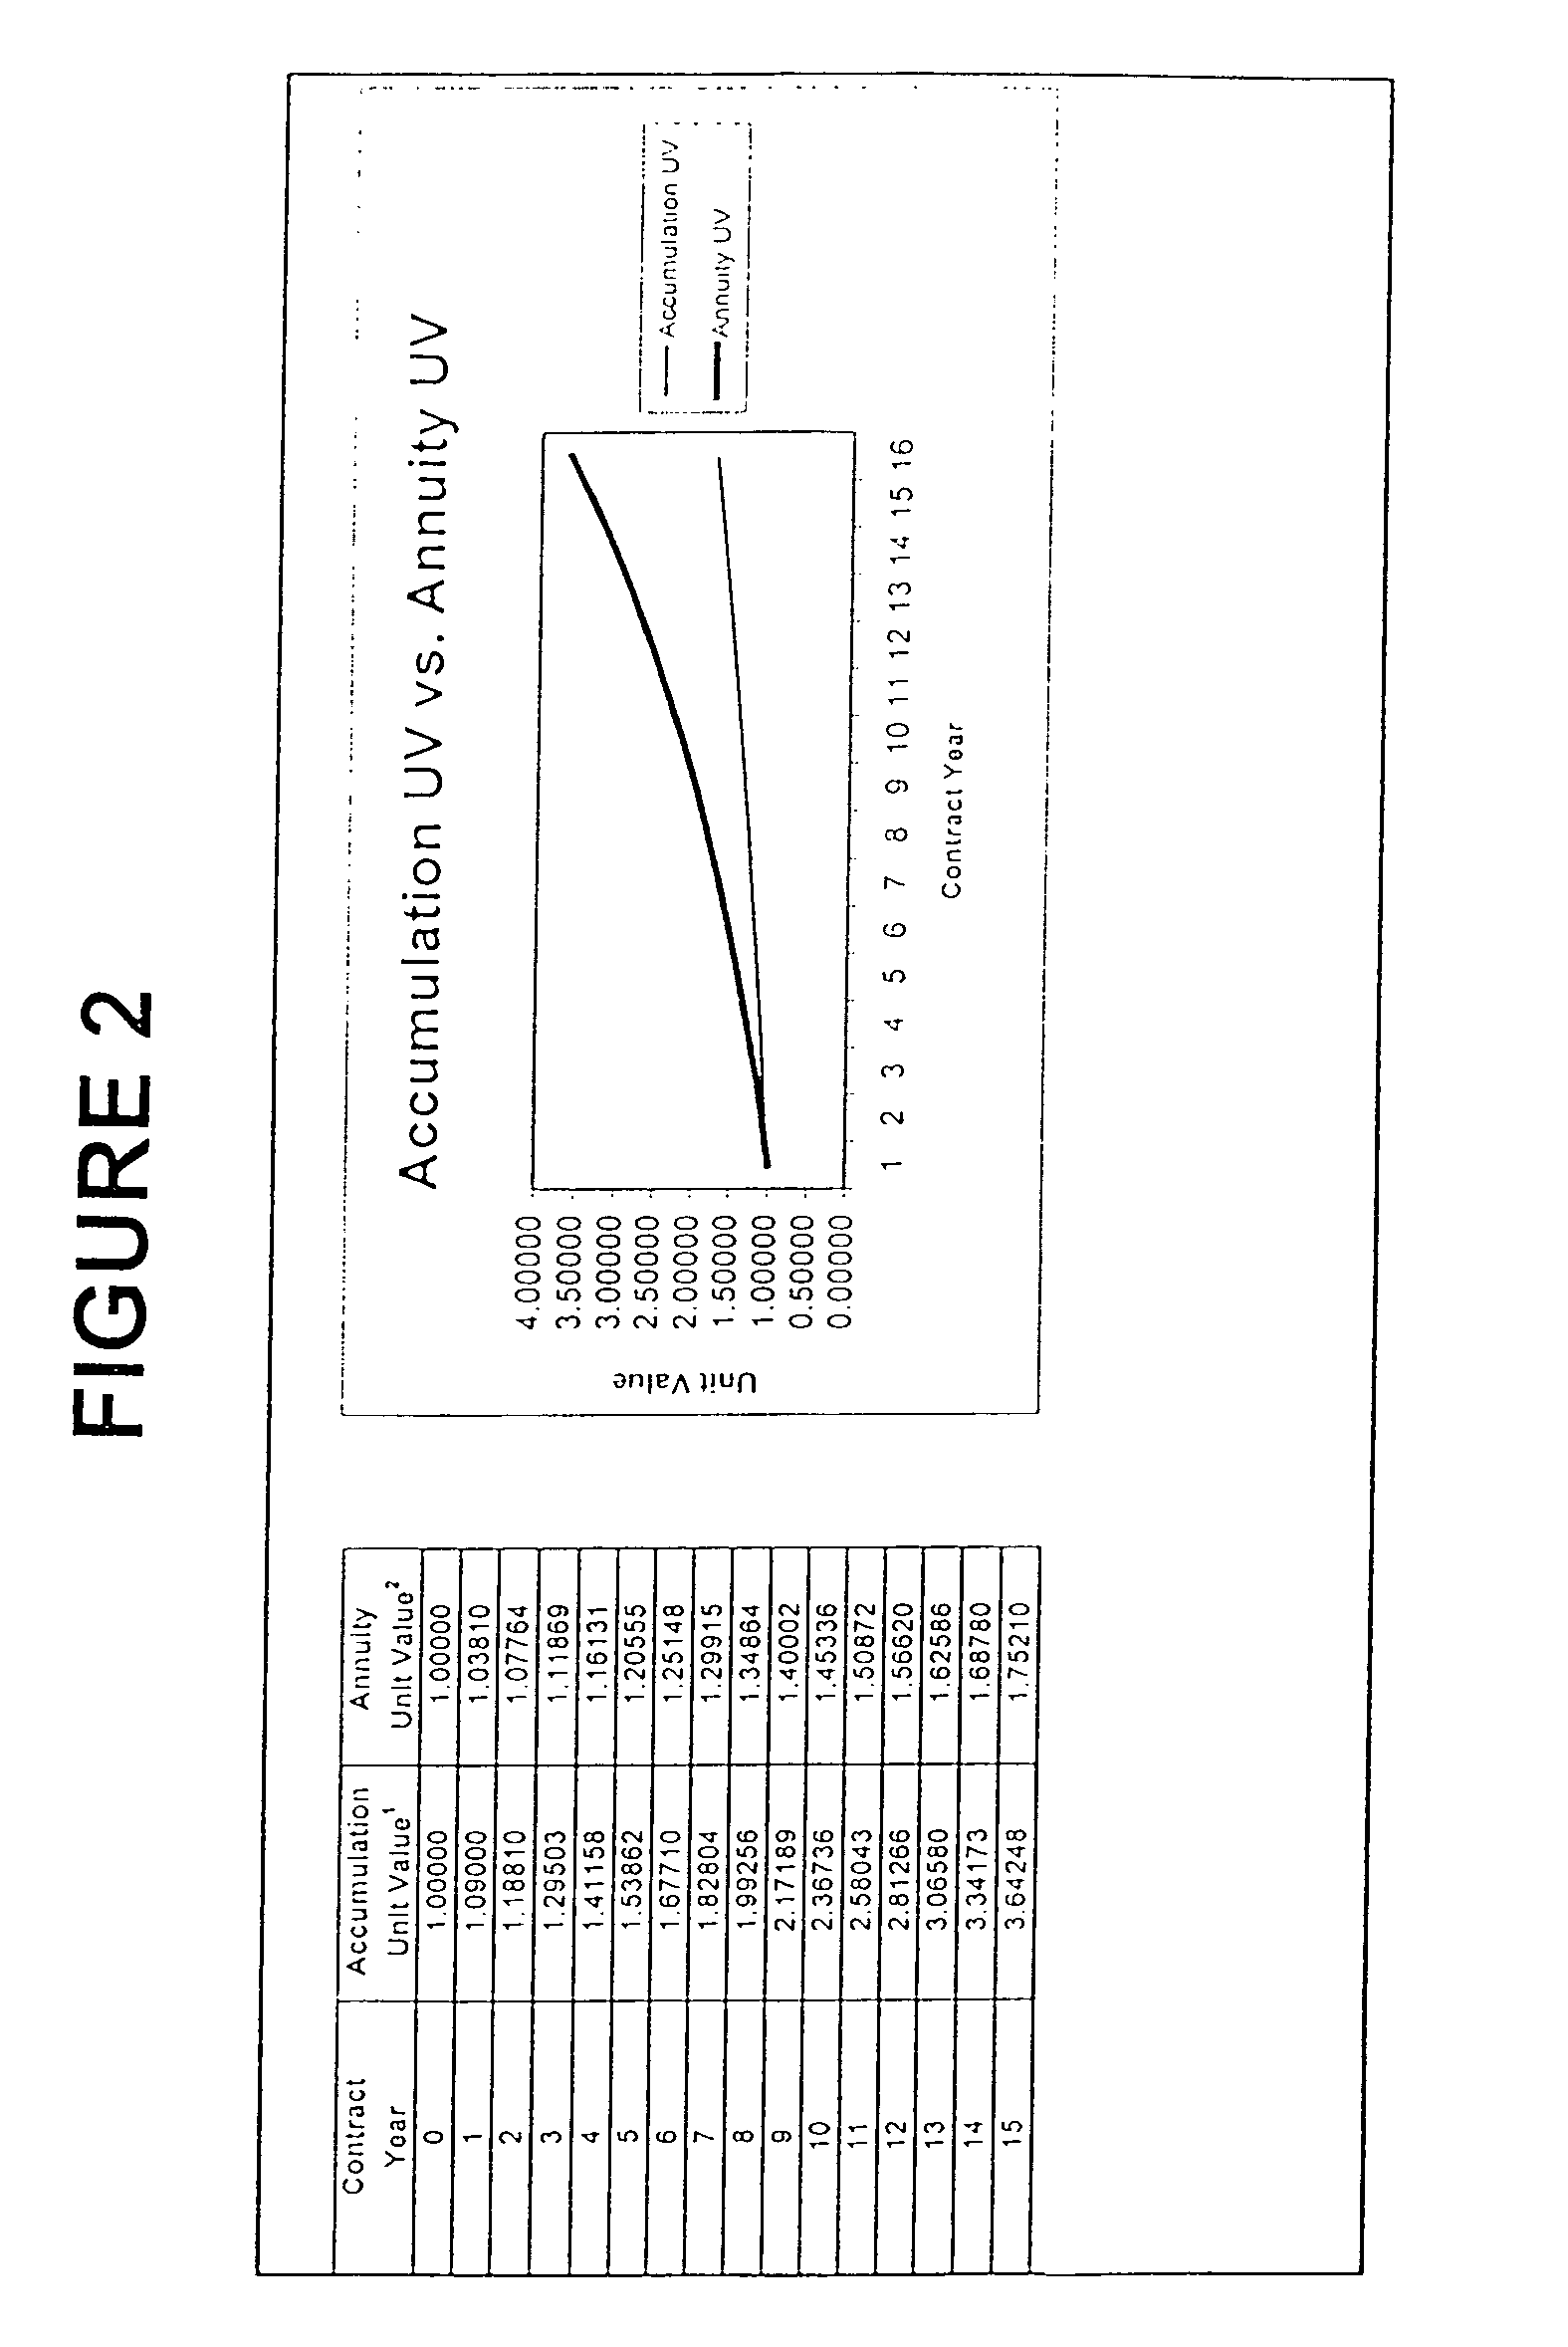 Method and apparatus for providing retirement income benefits